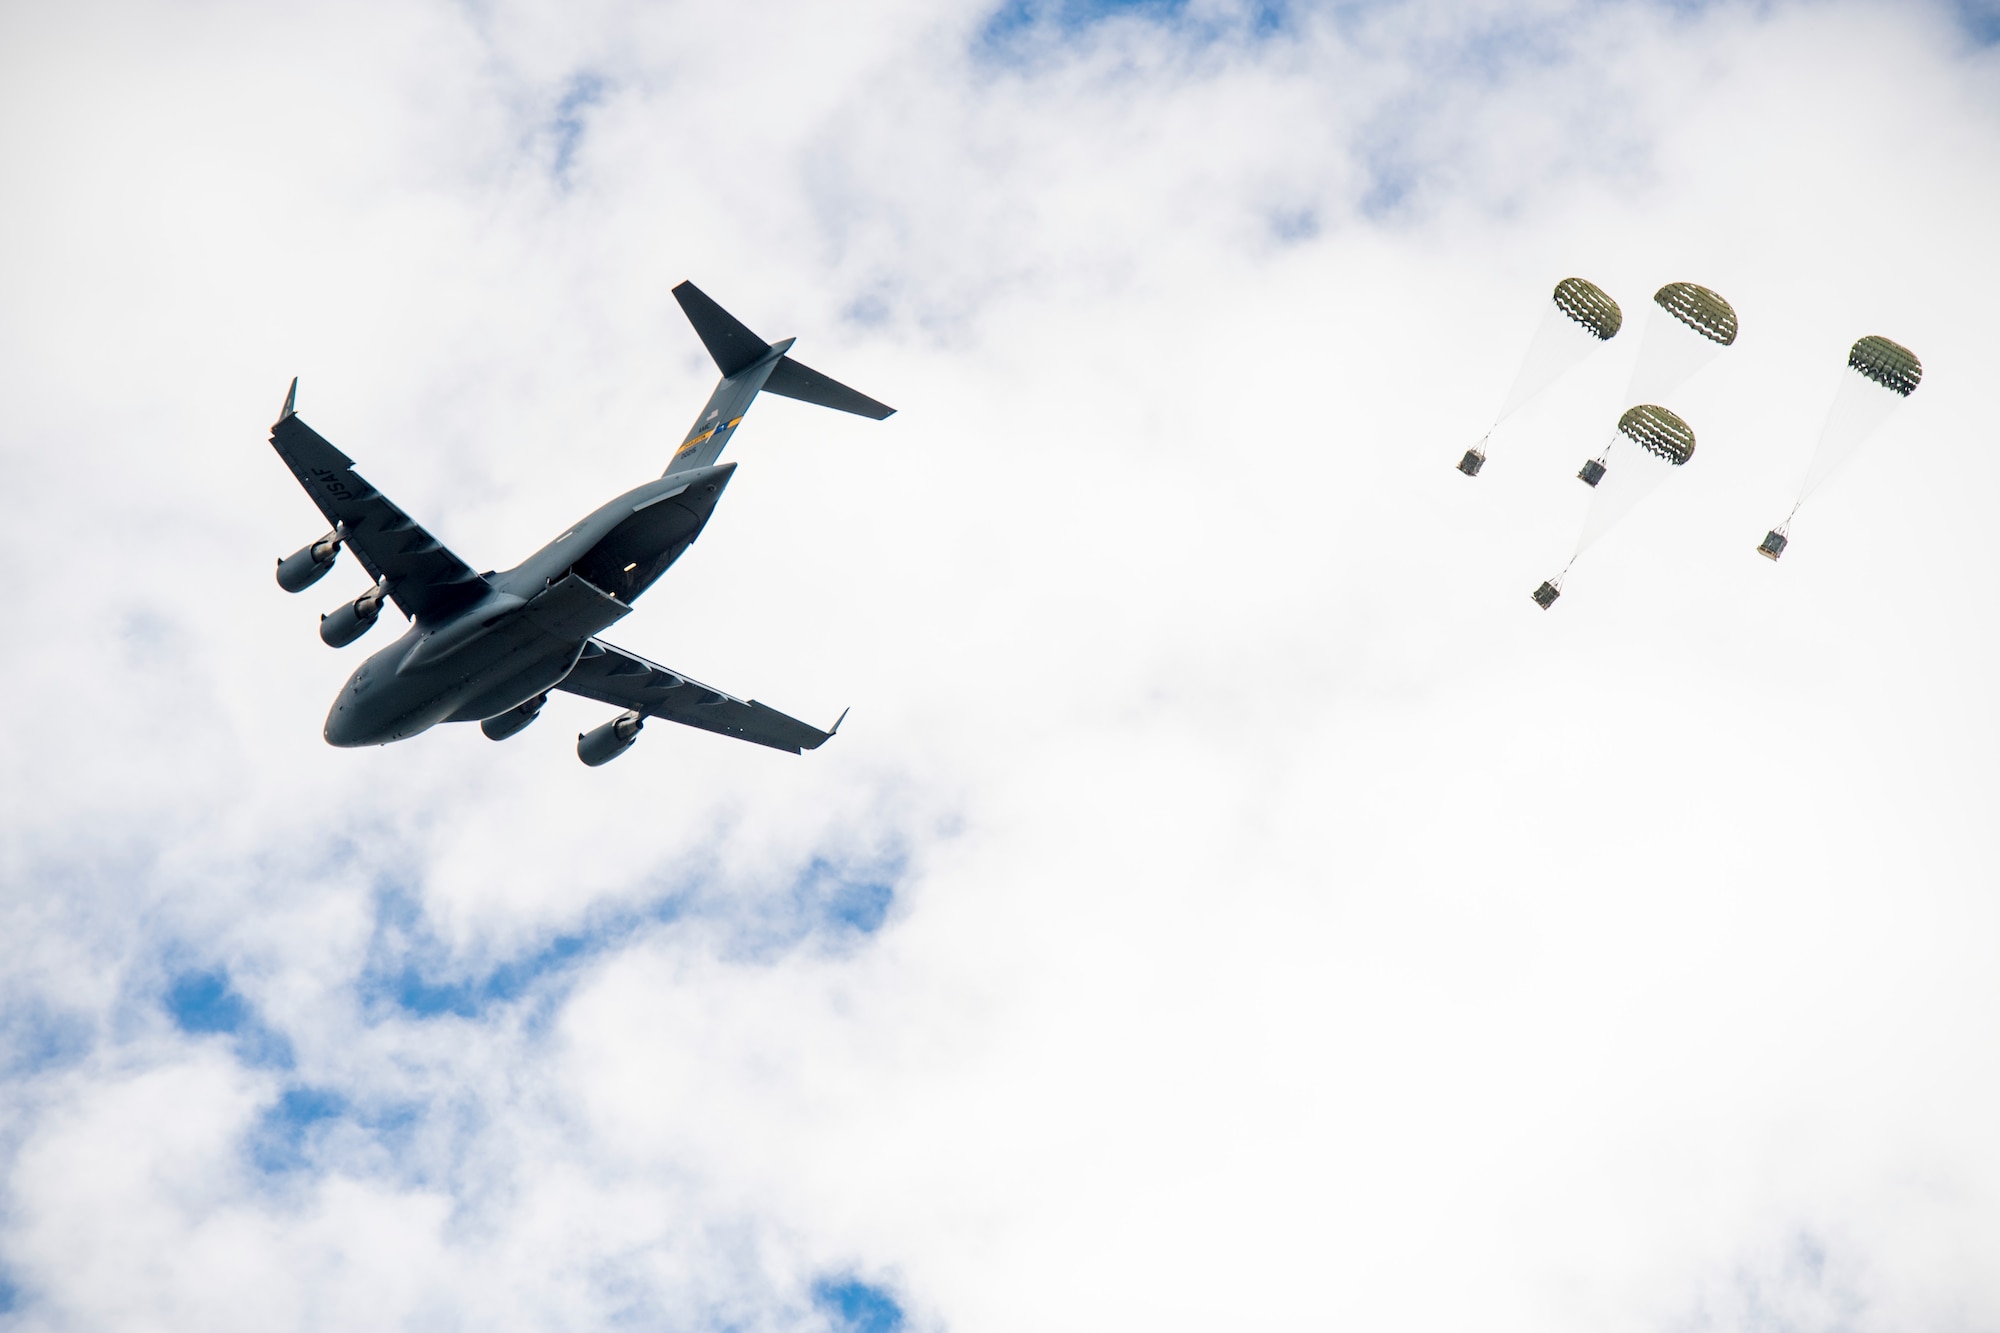 Fifteen C-17 Globemaster III's from the 437th and 315th Airlift Wing, Joint Base Charleston, South Carolina drop heavy platforms and container delivery systems over North Auxiliary Air Field, South Carolina, during an integrated
large formation readiness exercise, May 22, 2018.